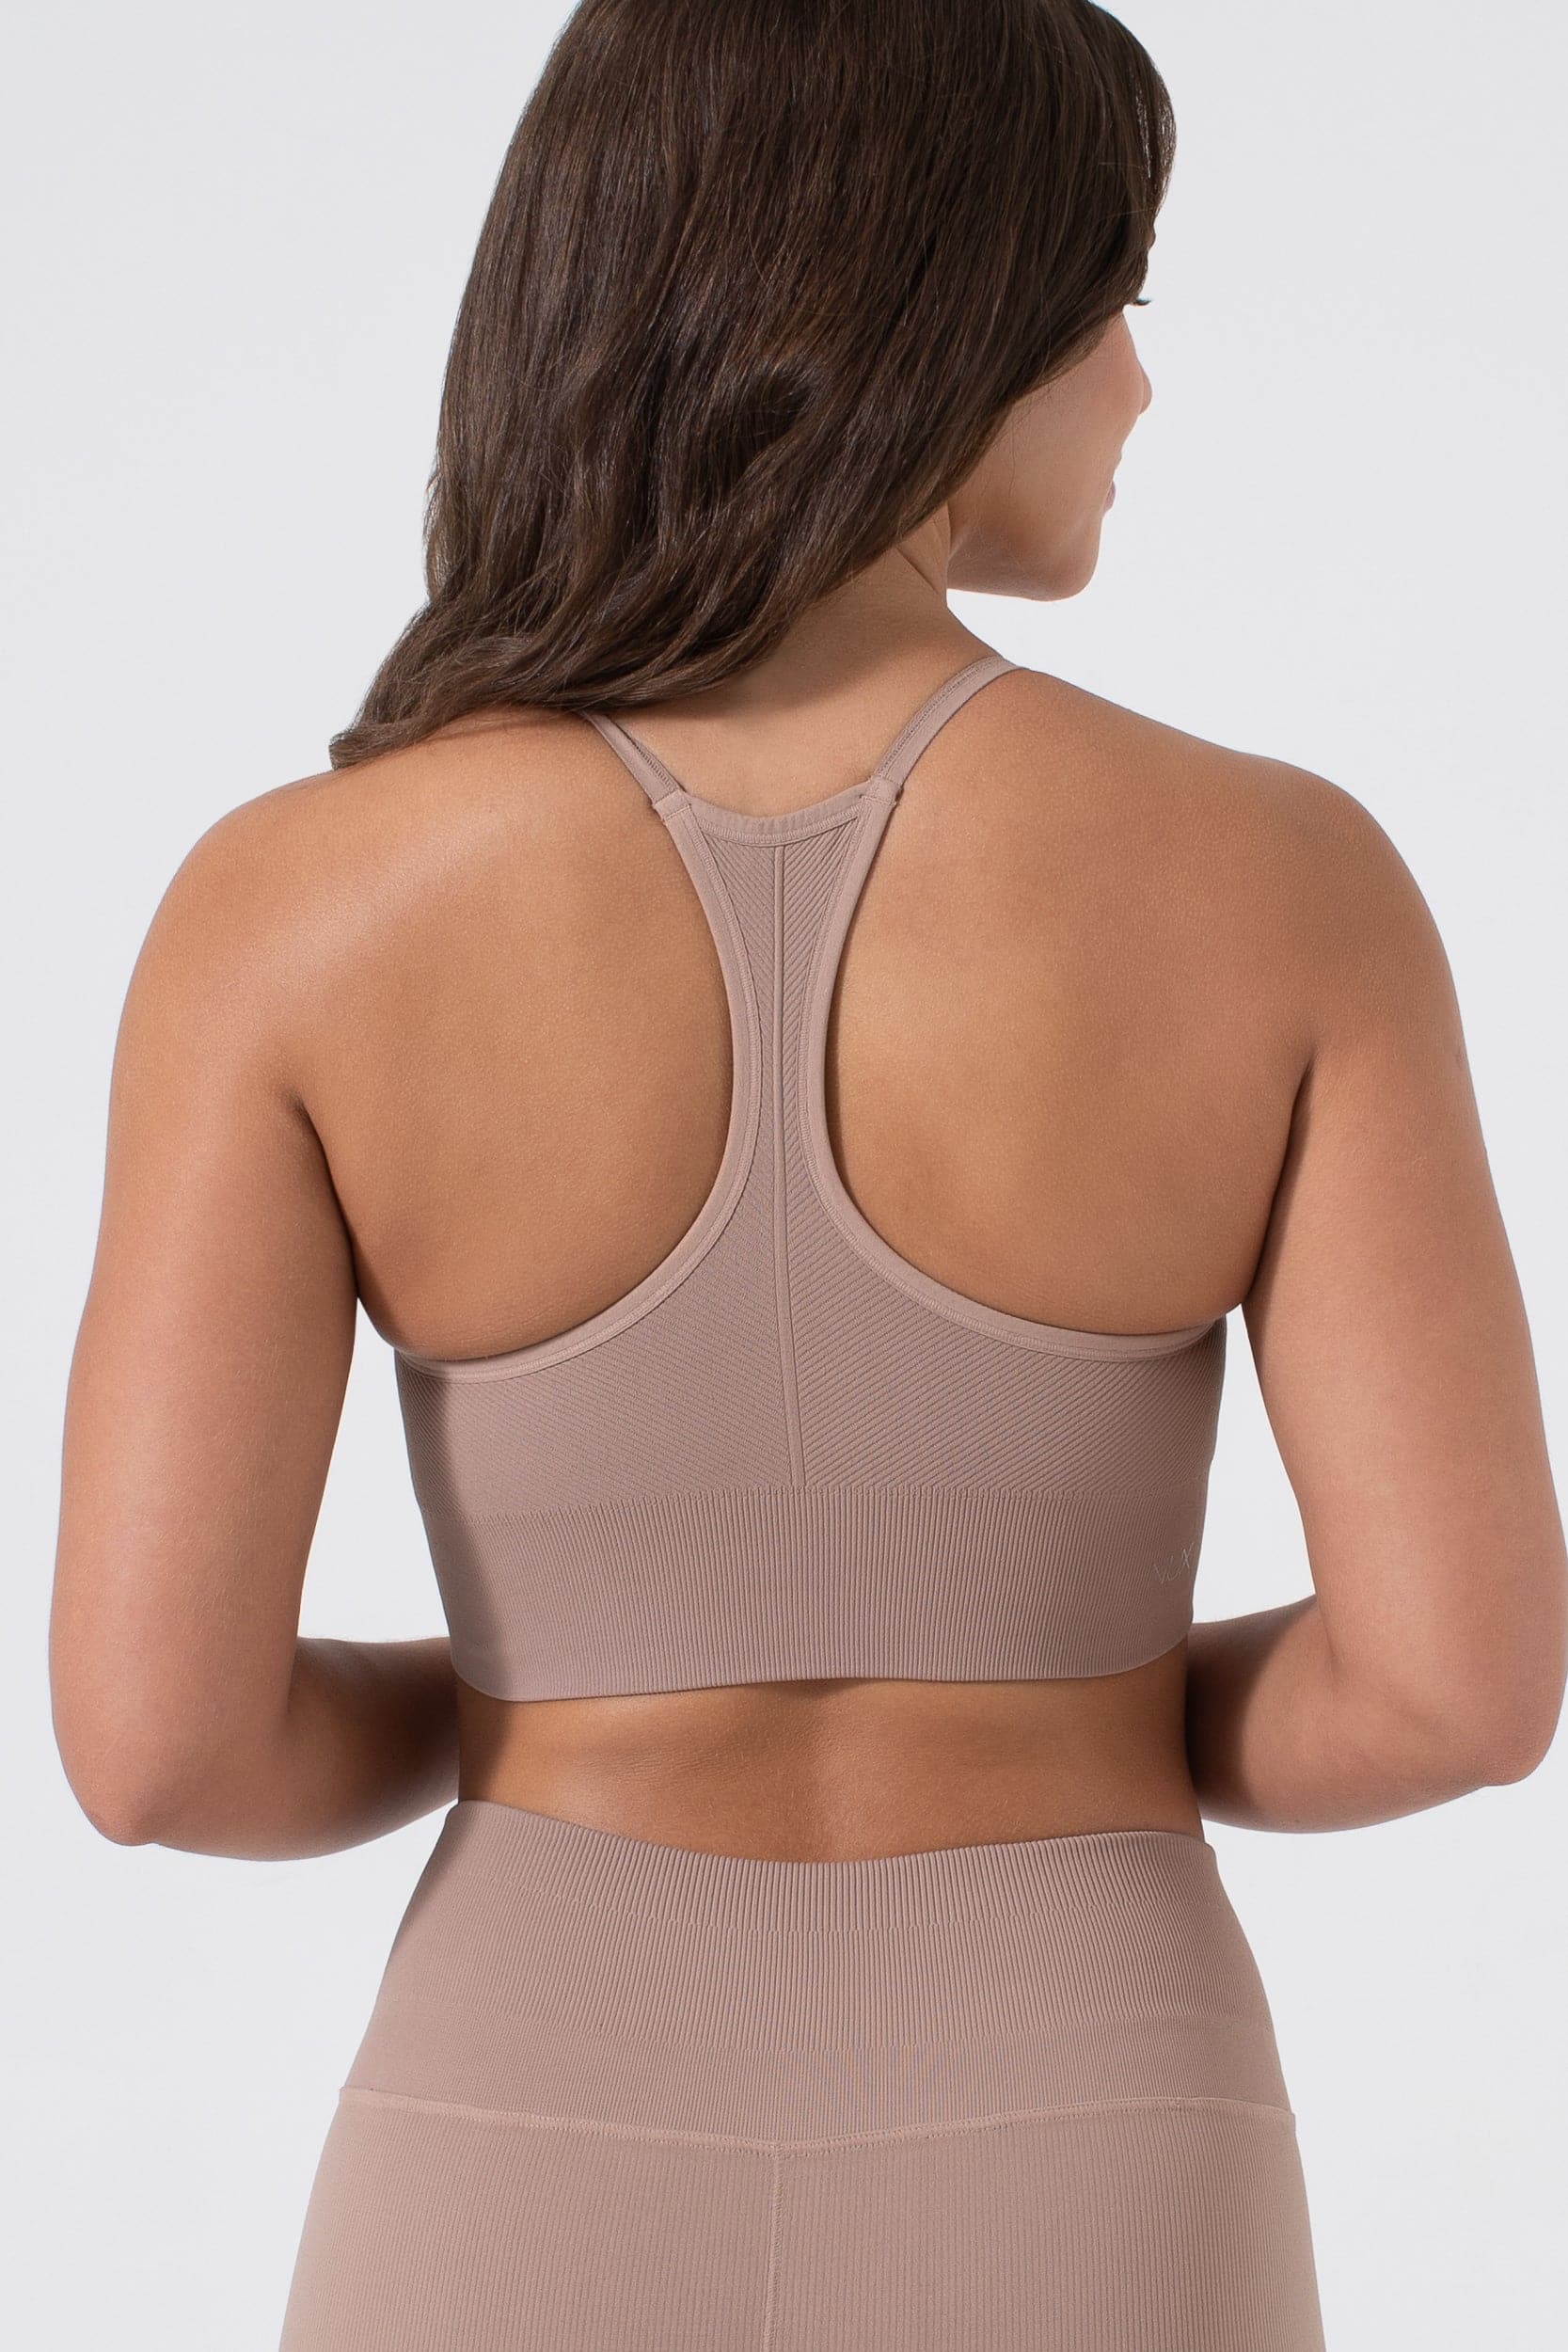 NEW activewear! Sculpting, supportive, AND comfortable. LANDYN10 for 1, Active  Wear